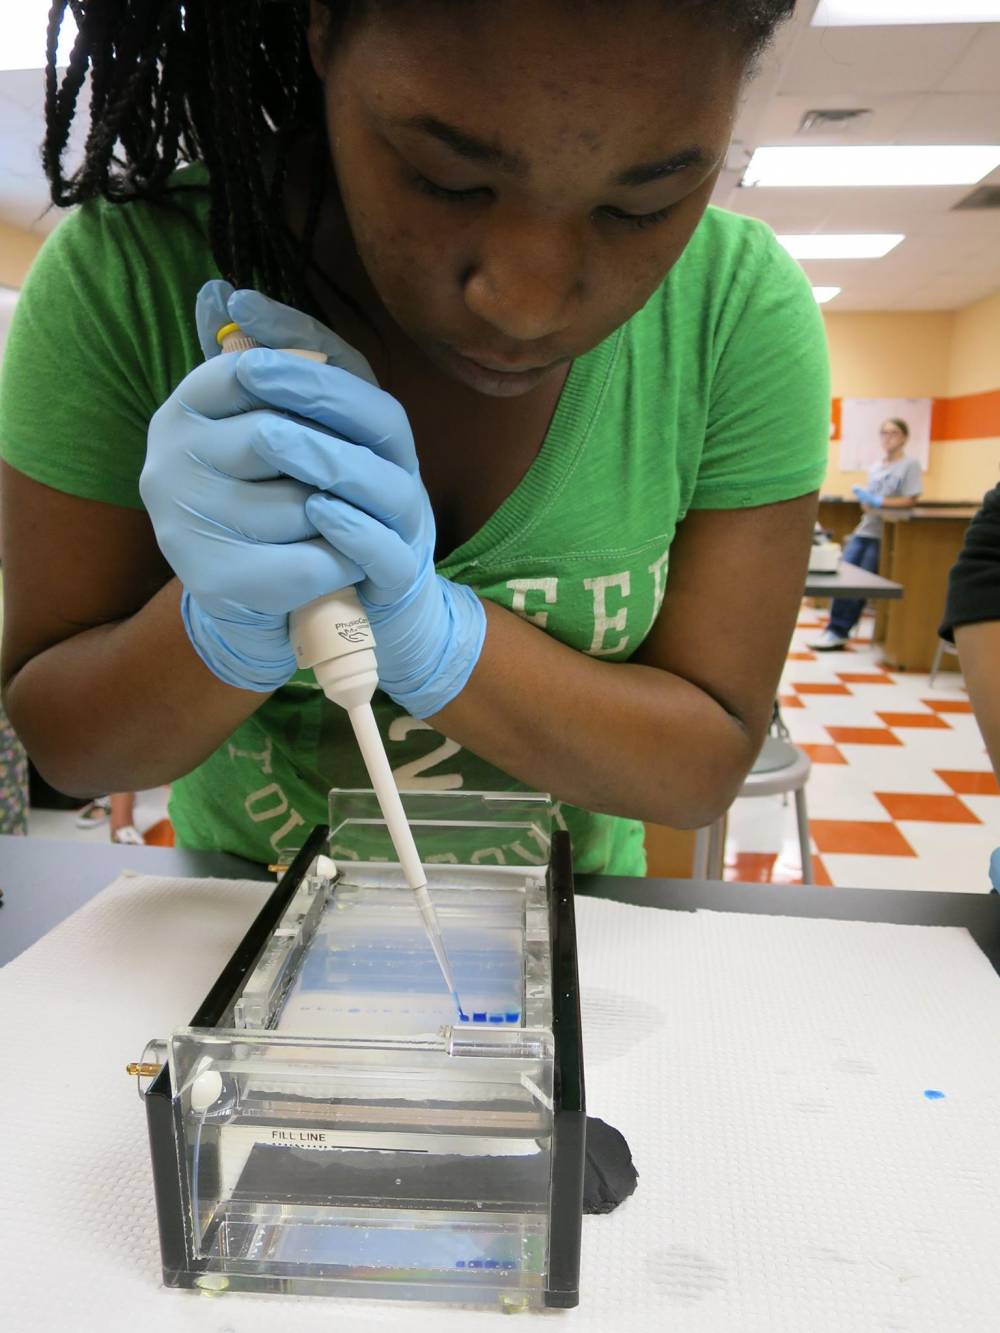 TOP SOUTH CAROLINA TECHNOLOGY CAMP: Clemson University Summer Science Camps is a Top Technology Summer Camp located in Clemson South Carolina offering many fun and enriching Technology and other camp programs. 